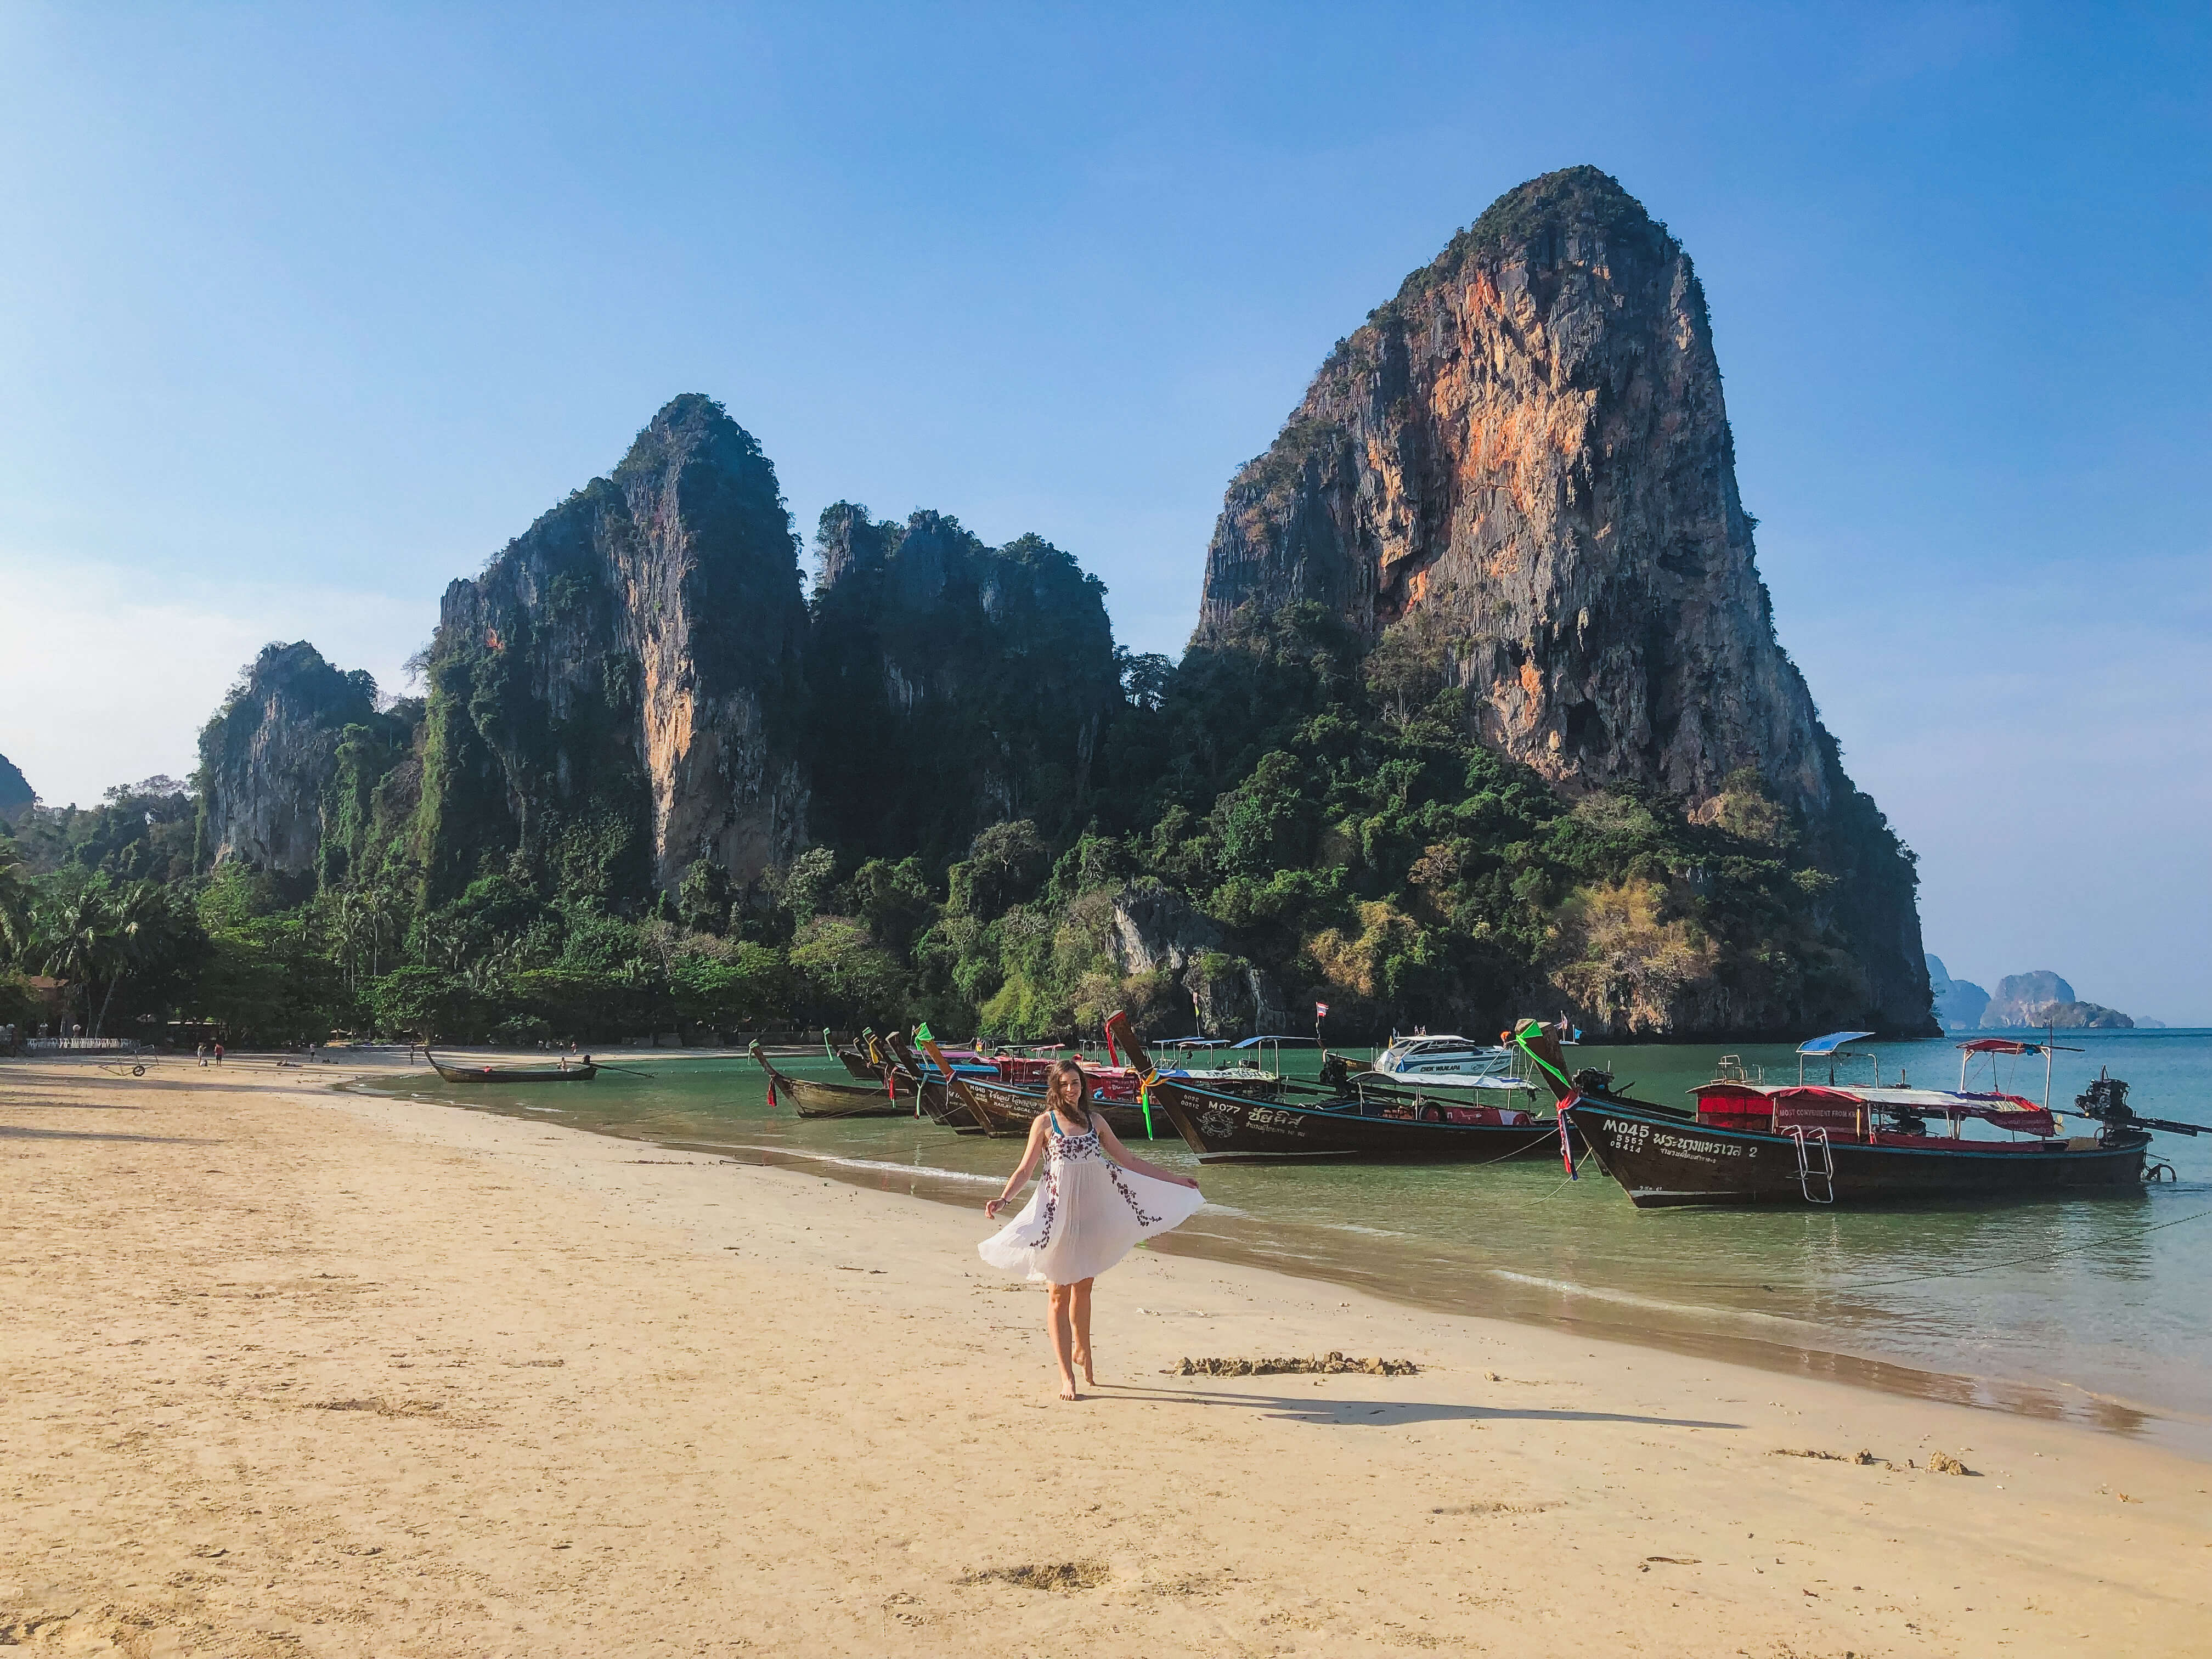 Top Things to Do on Railay Beach, Thailand - Travel Guide *Into